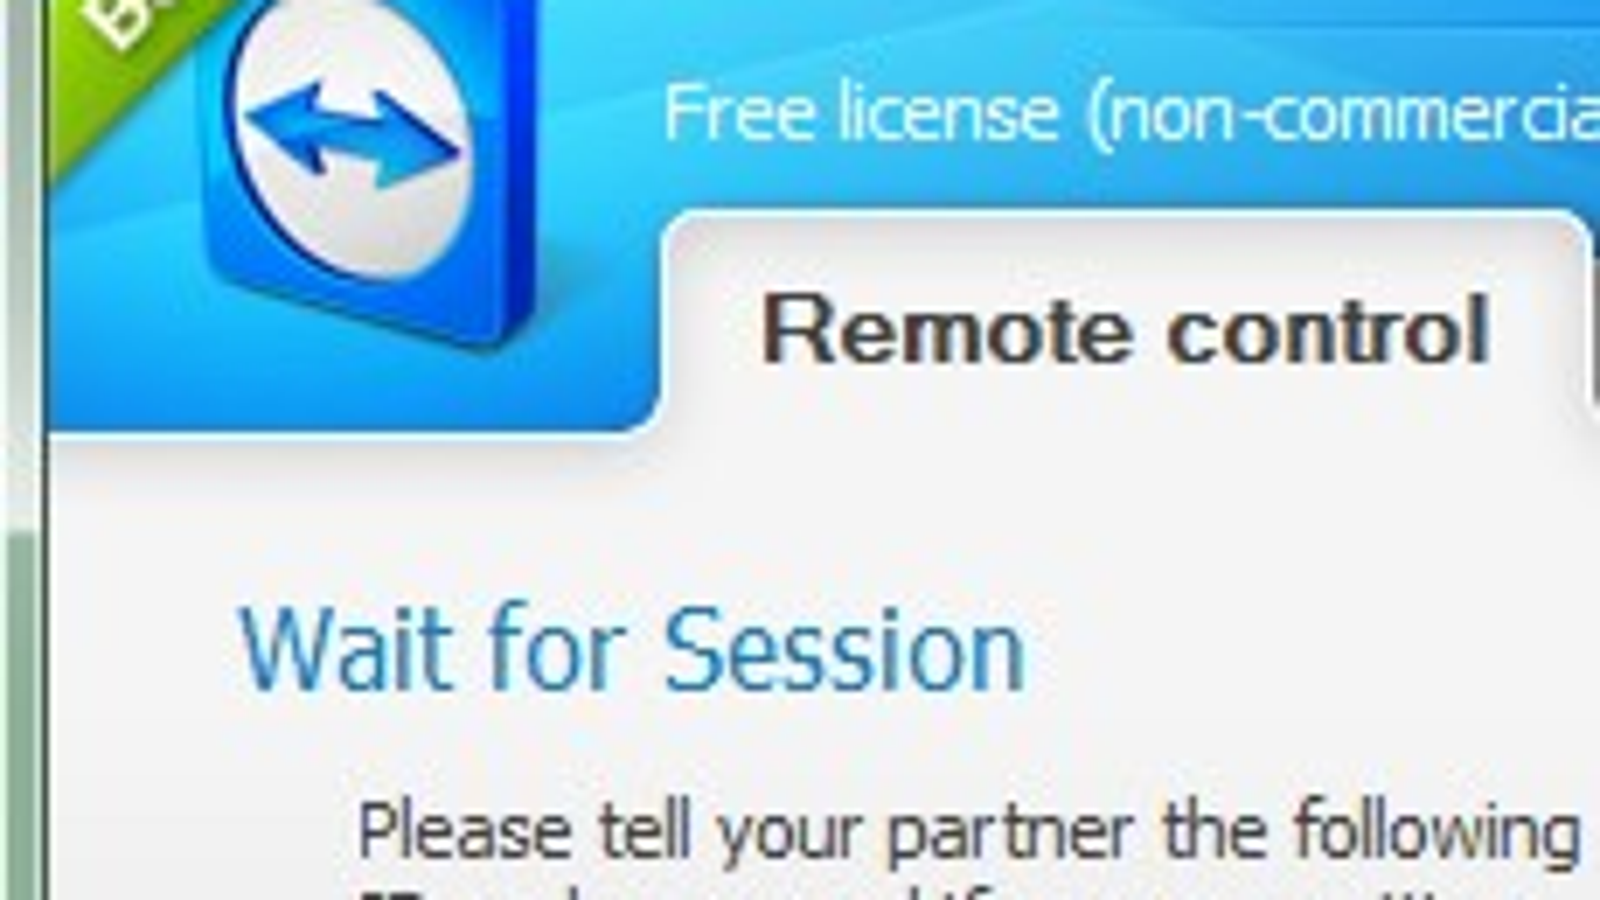 quick join teamviewer